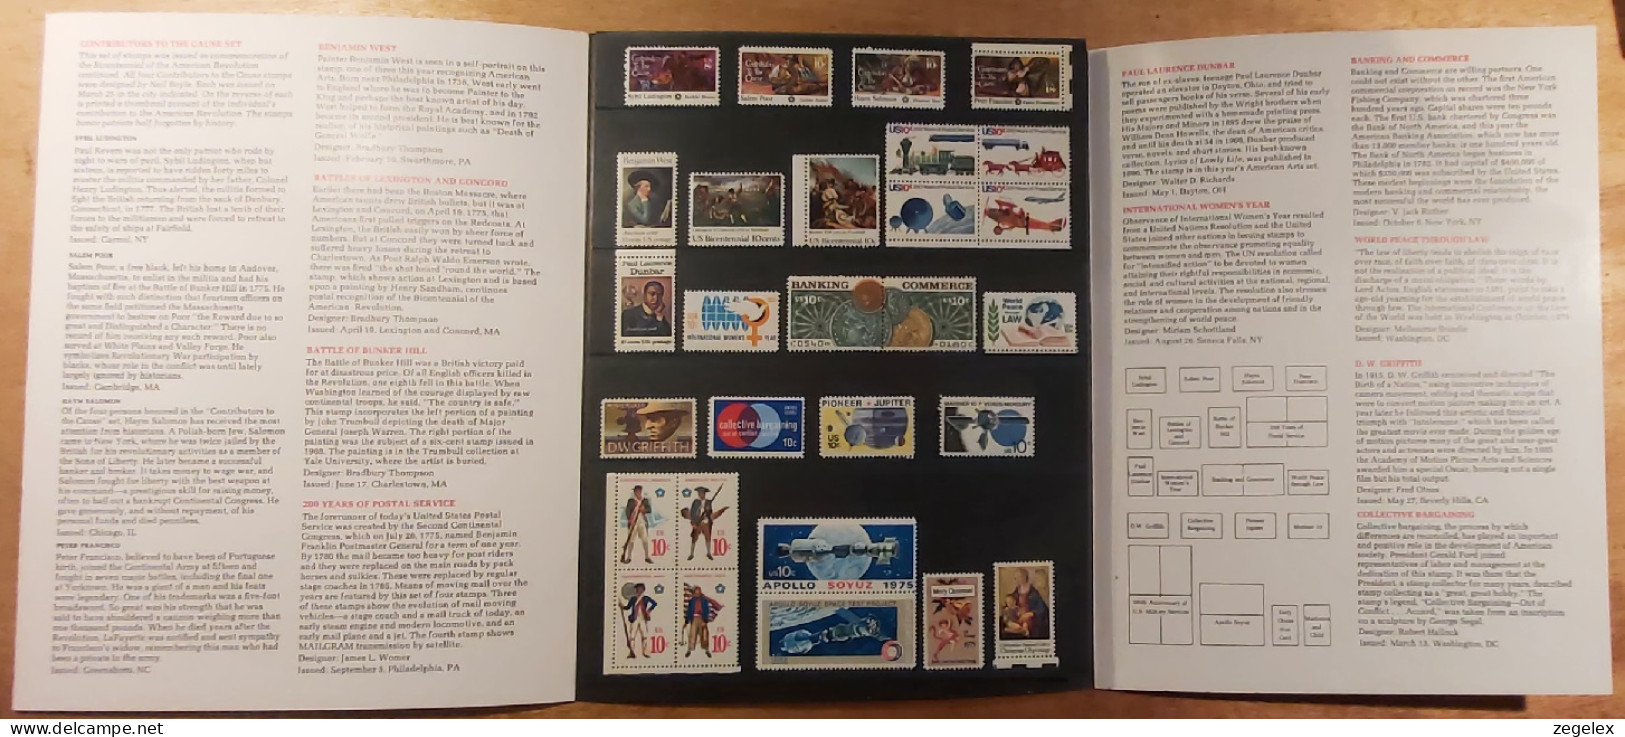 USA Postal Service Mint Set Of 1975 Commemorative And Special Stamps. MNH** - Annate Complete